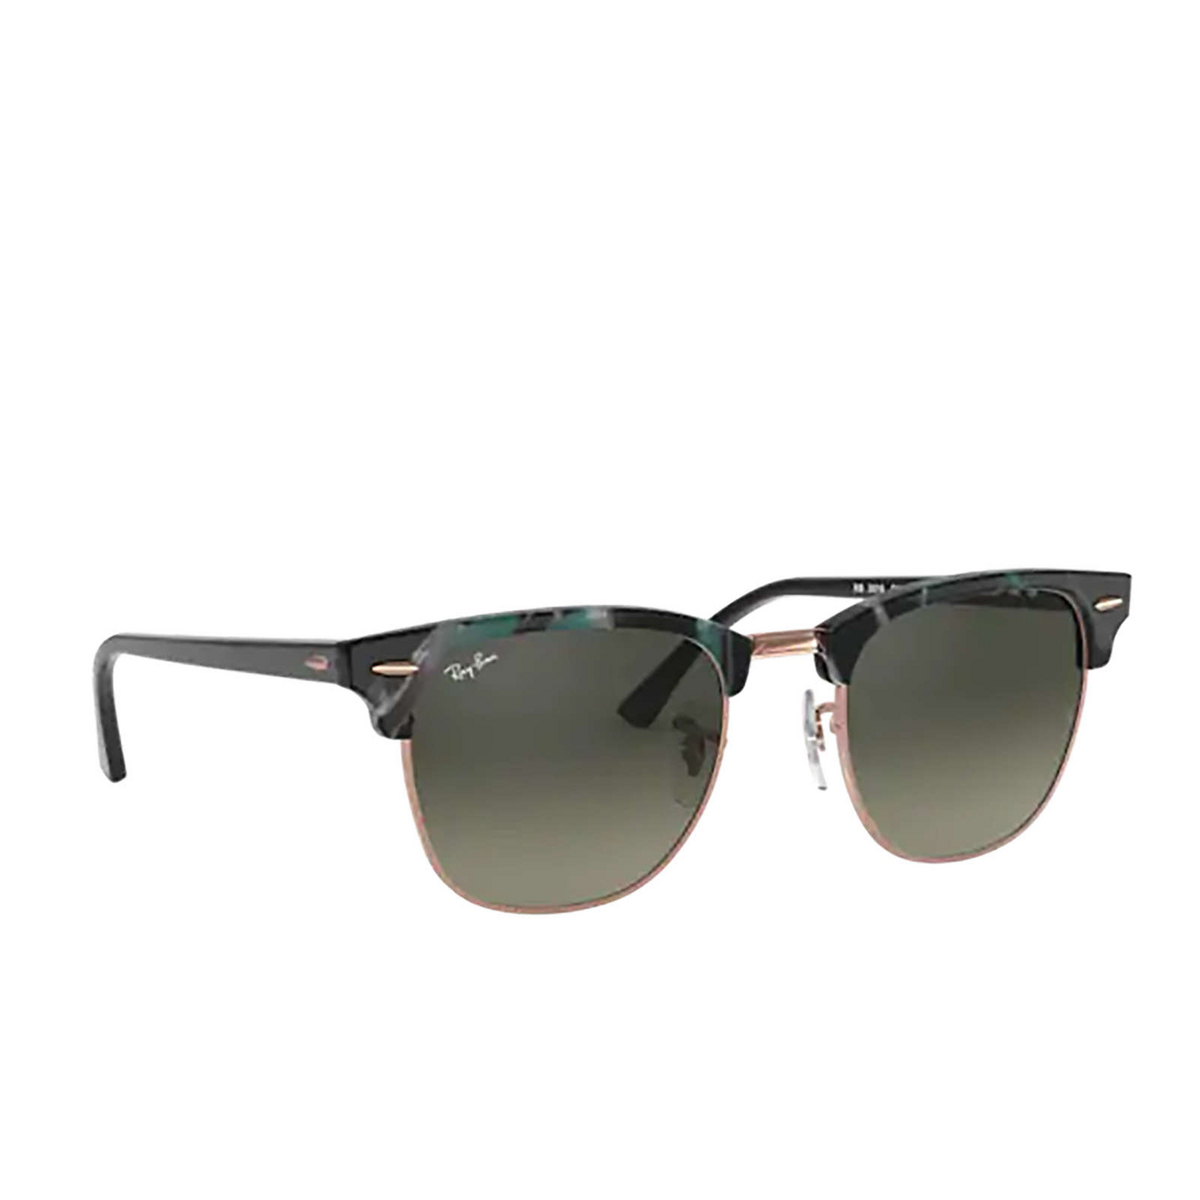 Ray-Ban CLUBMASTER Sunglasses 125571 Spotted Grey / Green - three-quarters view